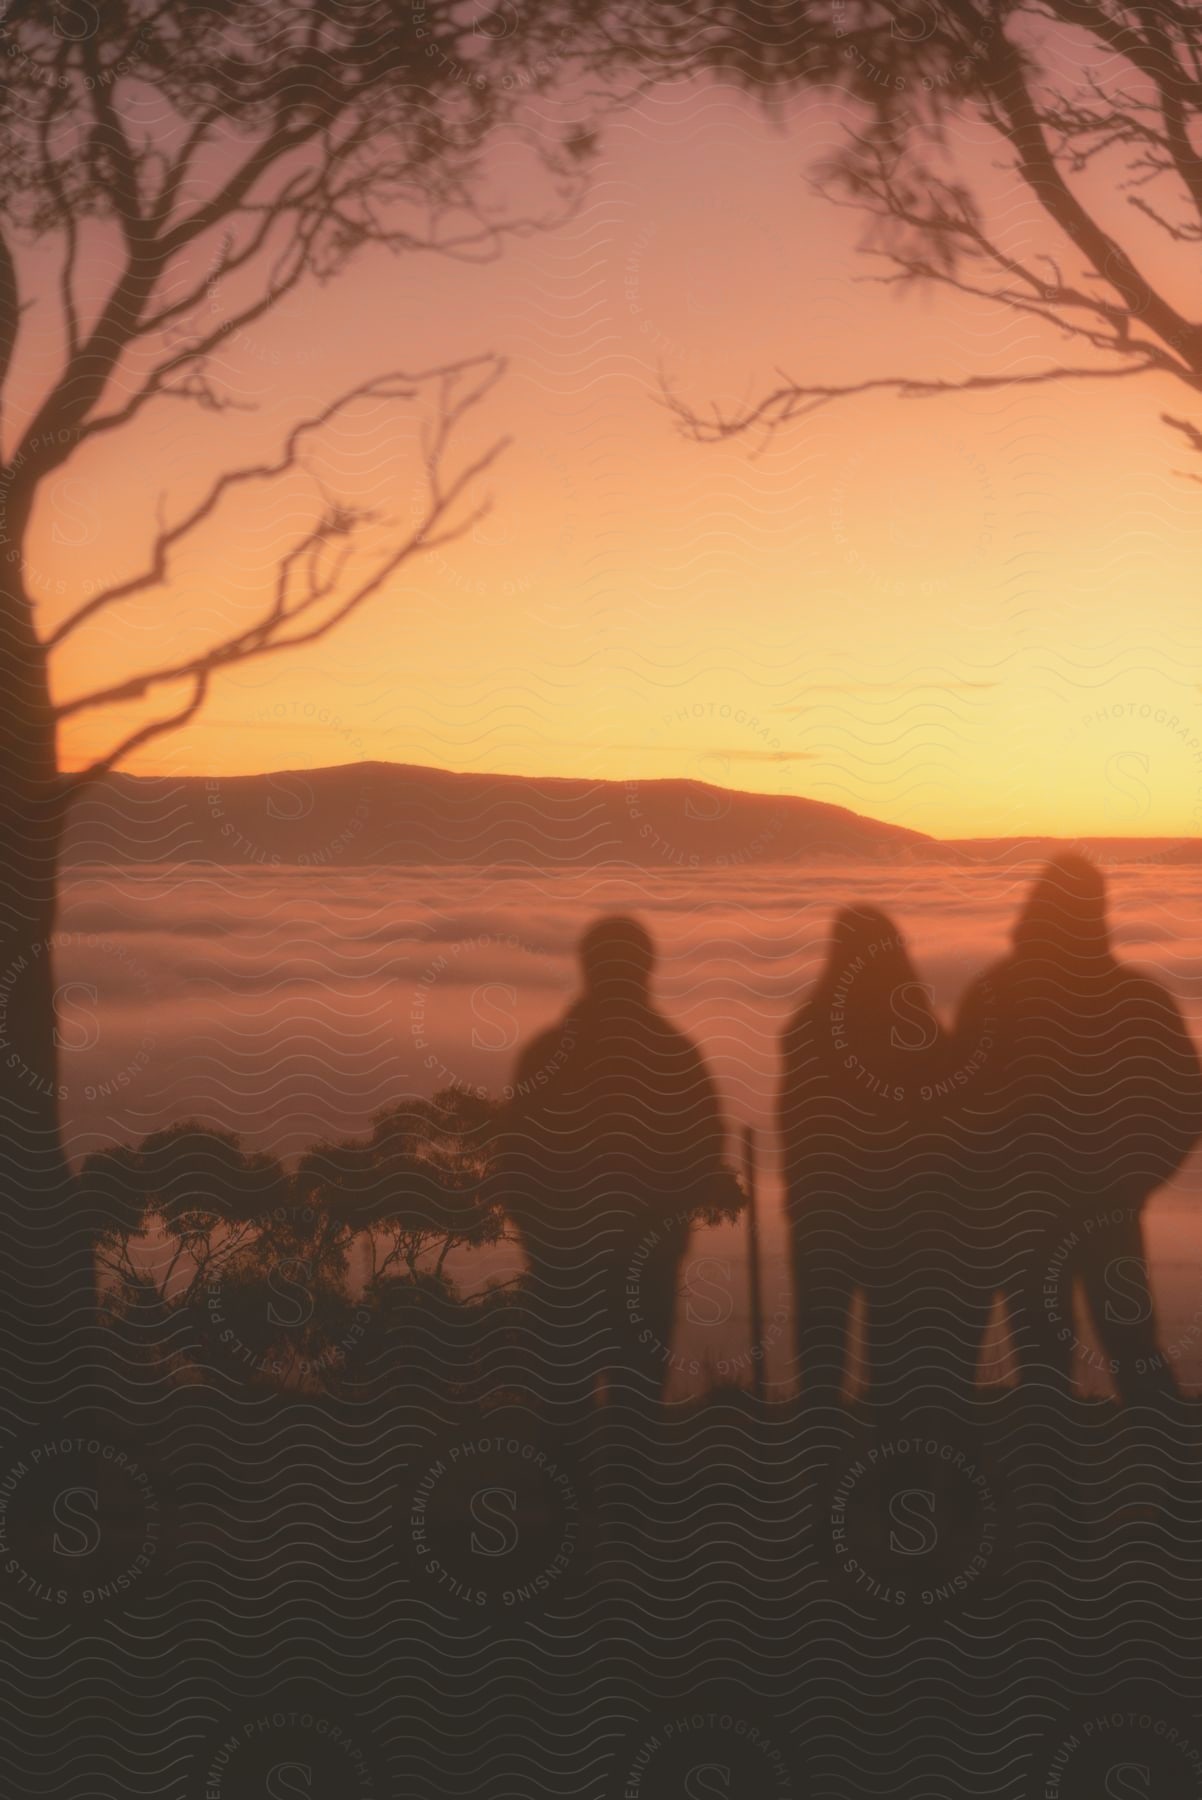 Three people looking on to a hill in the distance, the clouds covering it's way